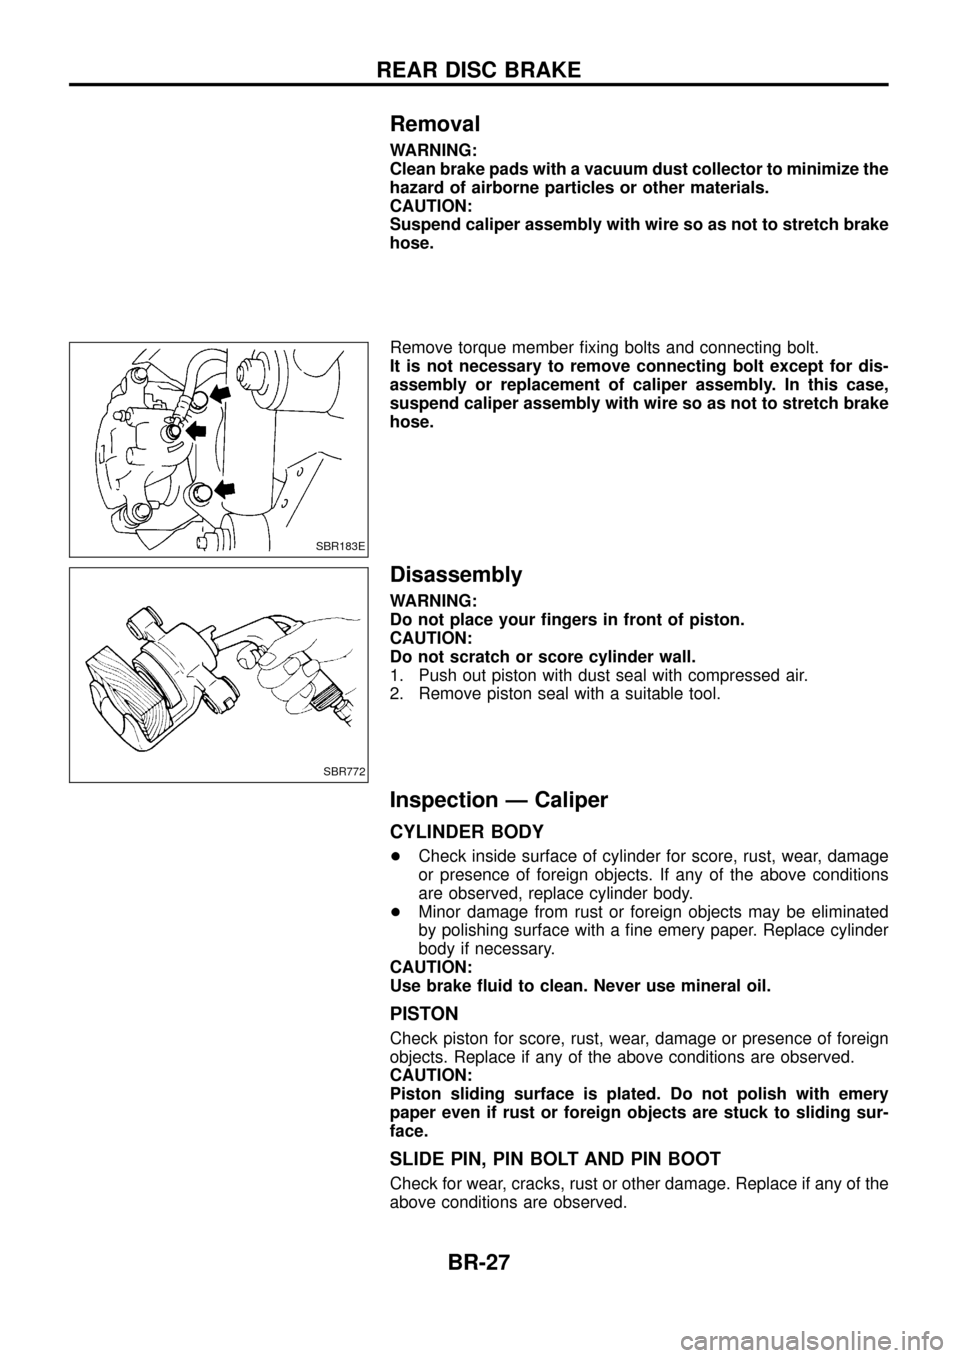 NISSAN PATROL 1998 Y61 / 5.G Brake System Owners Manual Removal
WARNING:
Clean brake pads with a vacuum dust collector to minimize the
hazard of airborne particles or other materials.
CAUTION:
Suspend caliper assembly with wire so as not to stretch brake
h